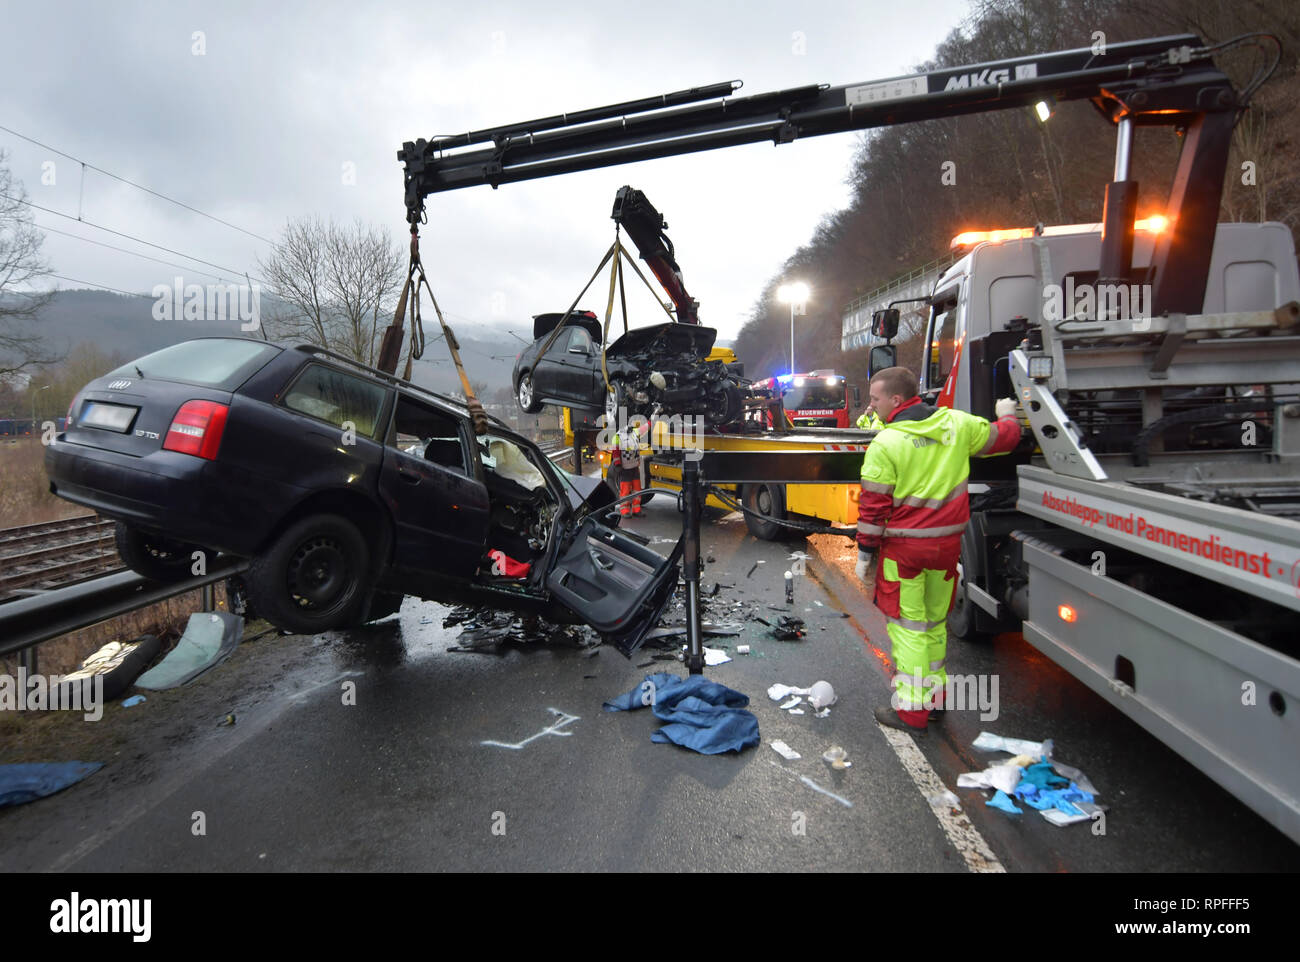 Olpe, Germany. 22nd Feb, 2019. Destroyed cars are transported after a serious accident. Three people died in a frontal collision between two cars in the Sauerland region on Friday morning. A fourth person was seriously injured and taken to hospital, said a police spokeswoman. The cars had collided on the federal road between Finnentrop and Lenhausen (Olpe district). At first, the speaker was unable to say anything about the identity of the victims. Credit: Markus Klümper/dpa - ATTENTION: Indicator was pixelated for legal reasons/dpa/Alamy Live News Stock Photo